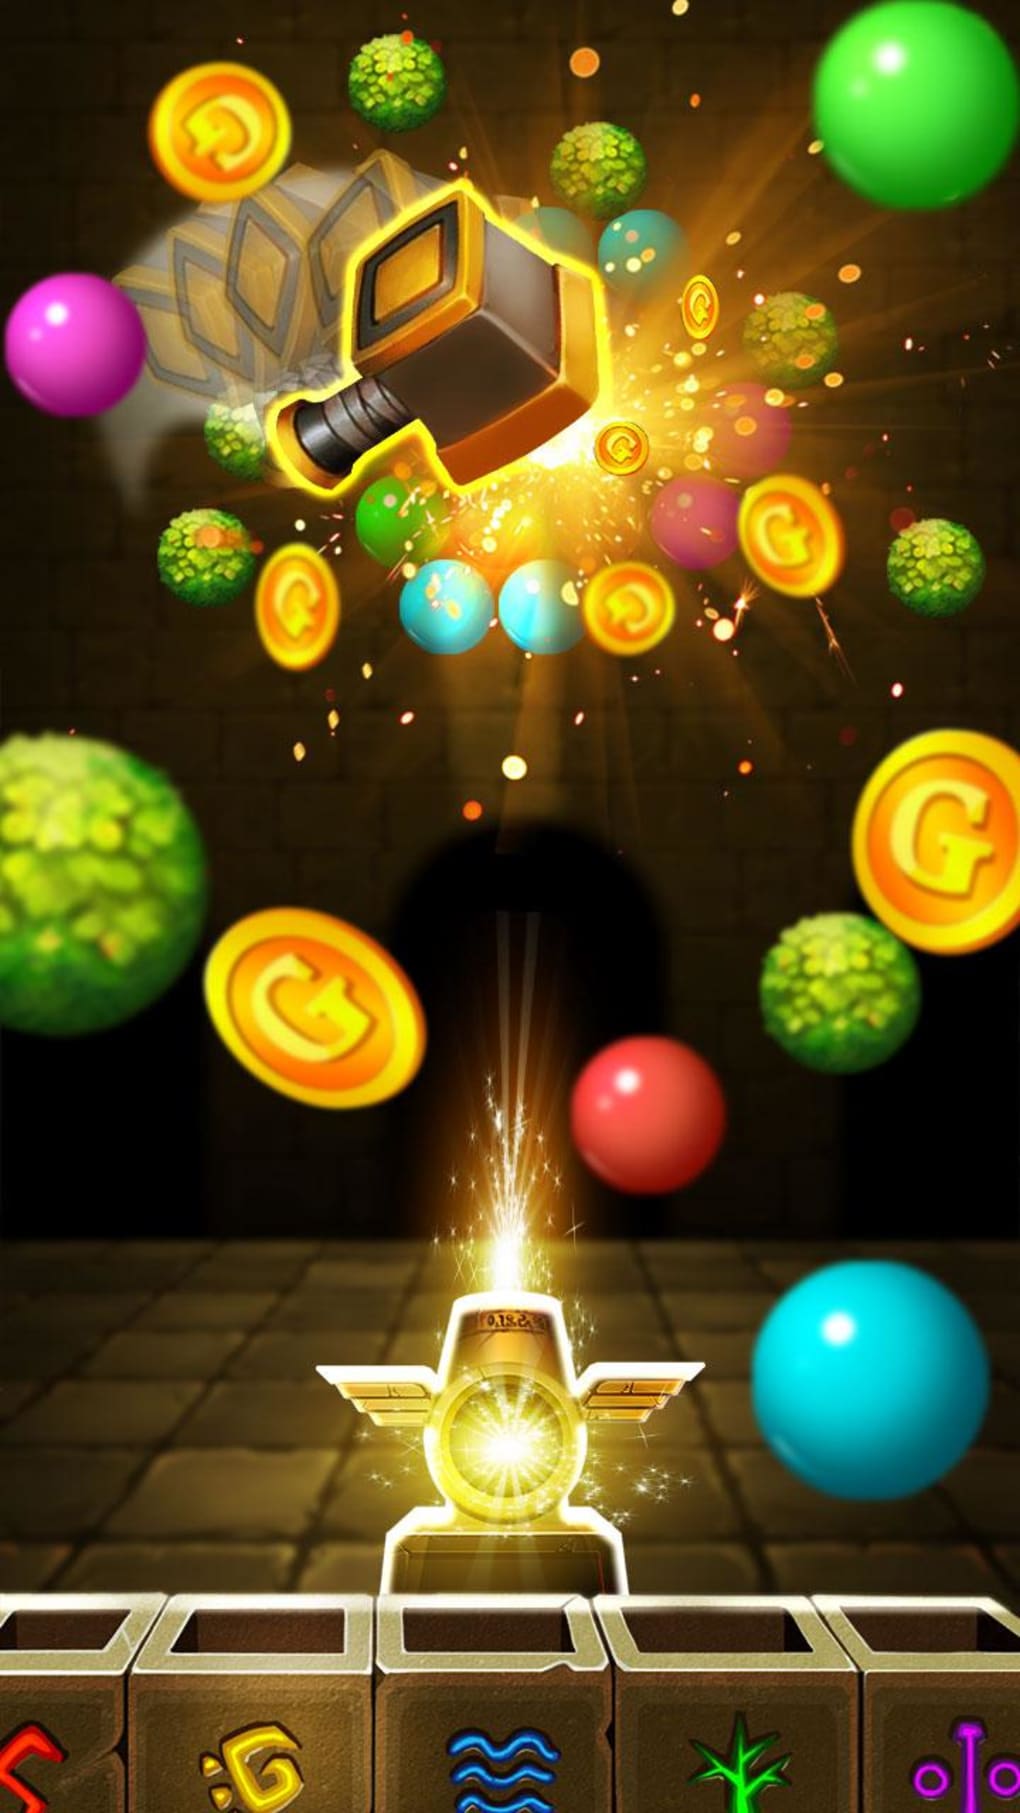 Download Hero Bubble Shooter ANDROID APP for PC/ Hero Bubble Shooter on PC  - Andy - Android Emulator for PC & Mac